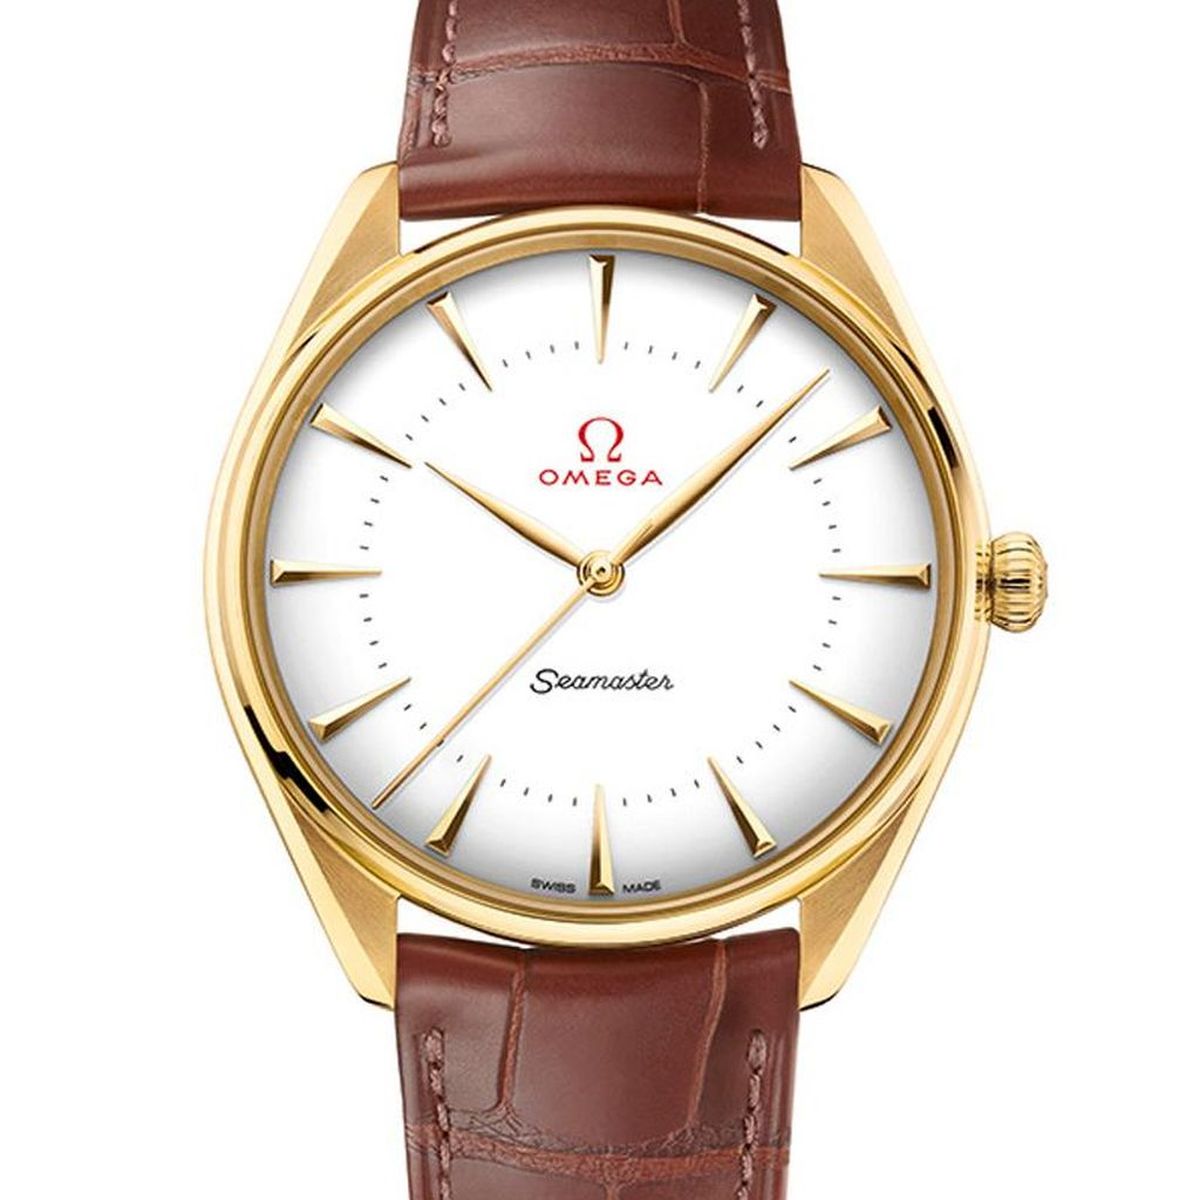 Omega Seamaster Olympic Games Watch Collection For 2018